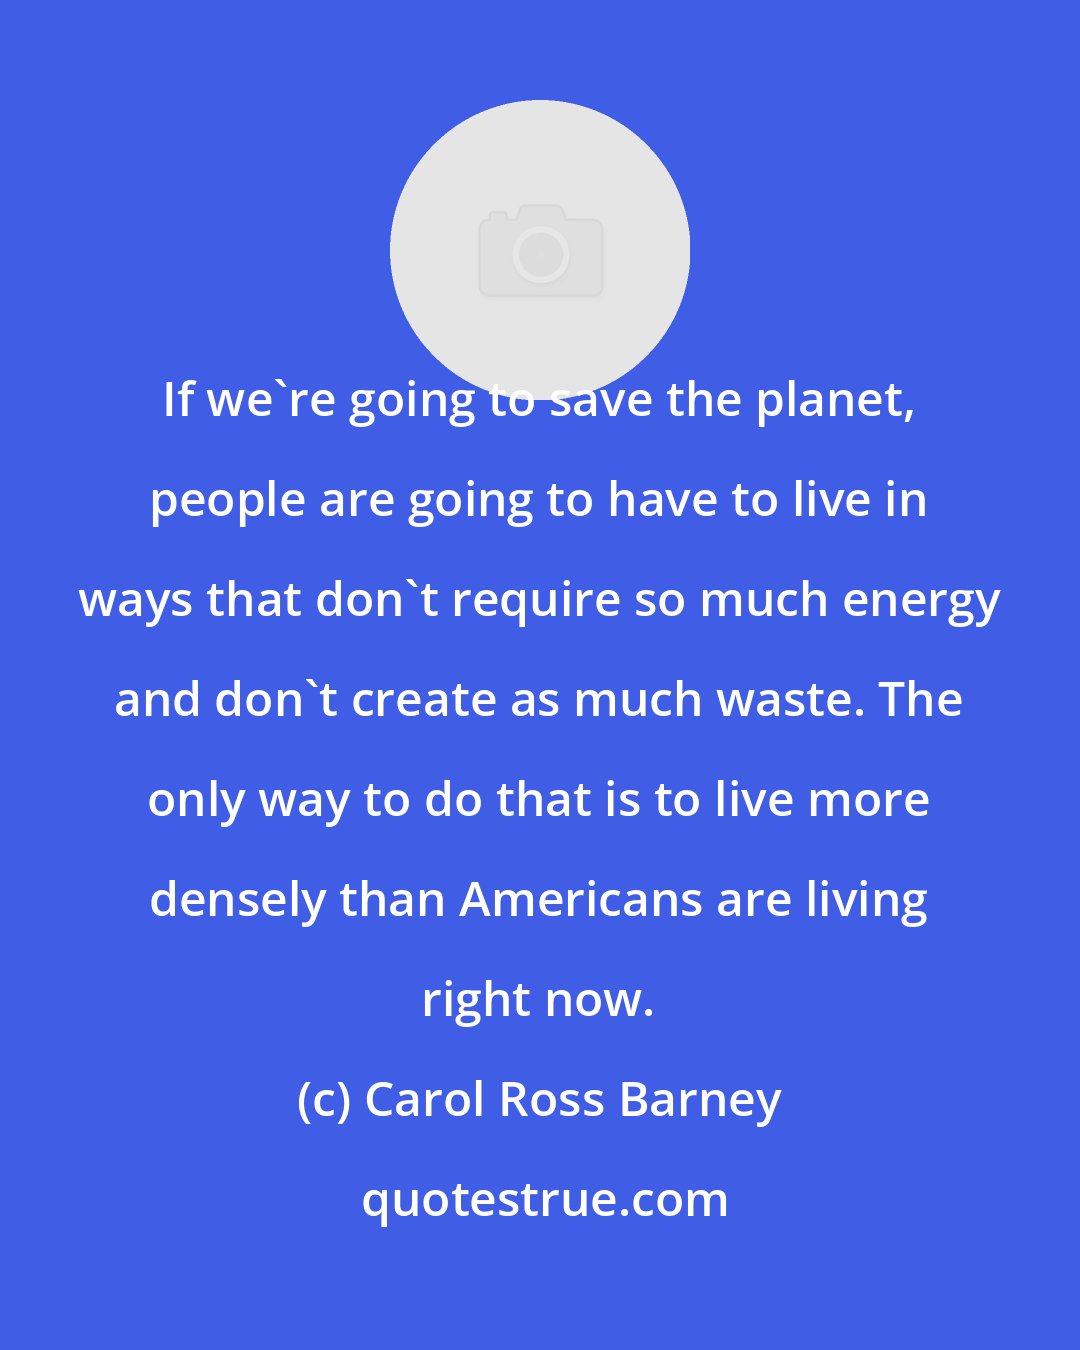 Carol Ross Barney: If we're going to save the planet, people are going to have to live in ways that don't require so much energy and don't create as much waste. The only way to do that is to live more densely than Americans are living right now.